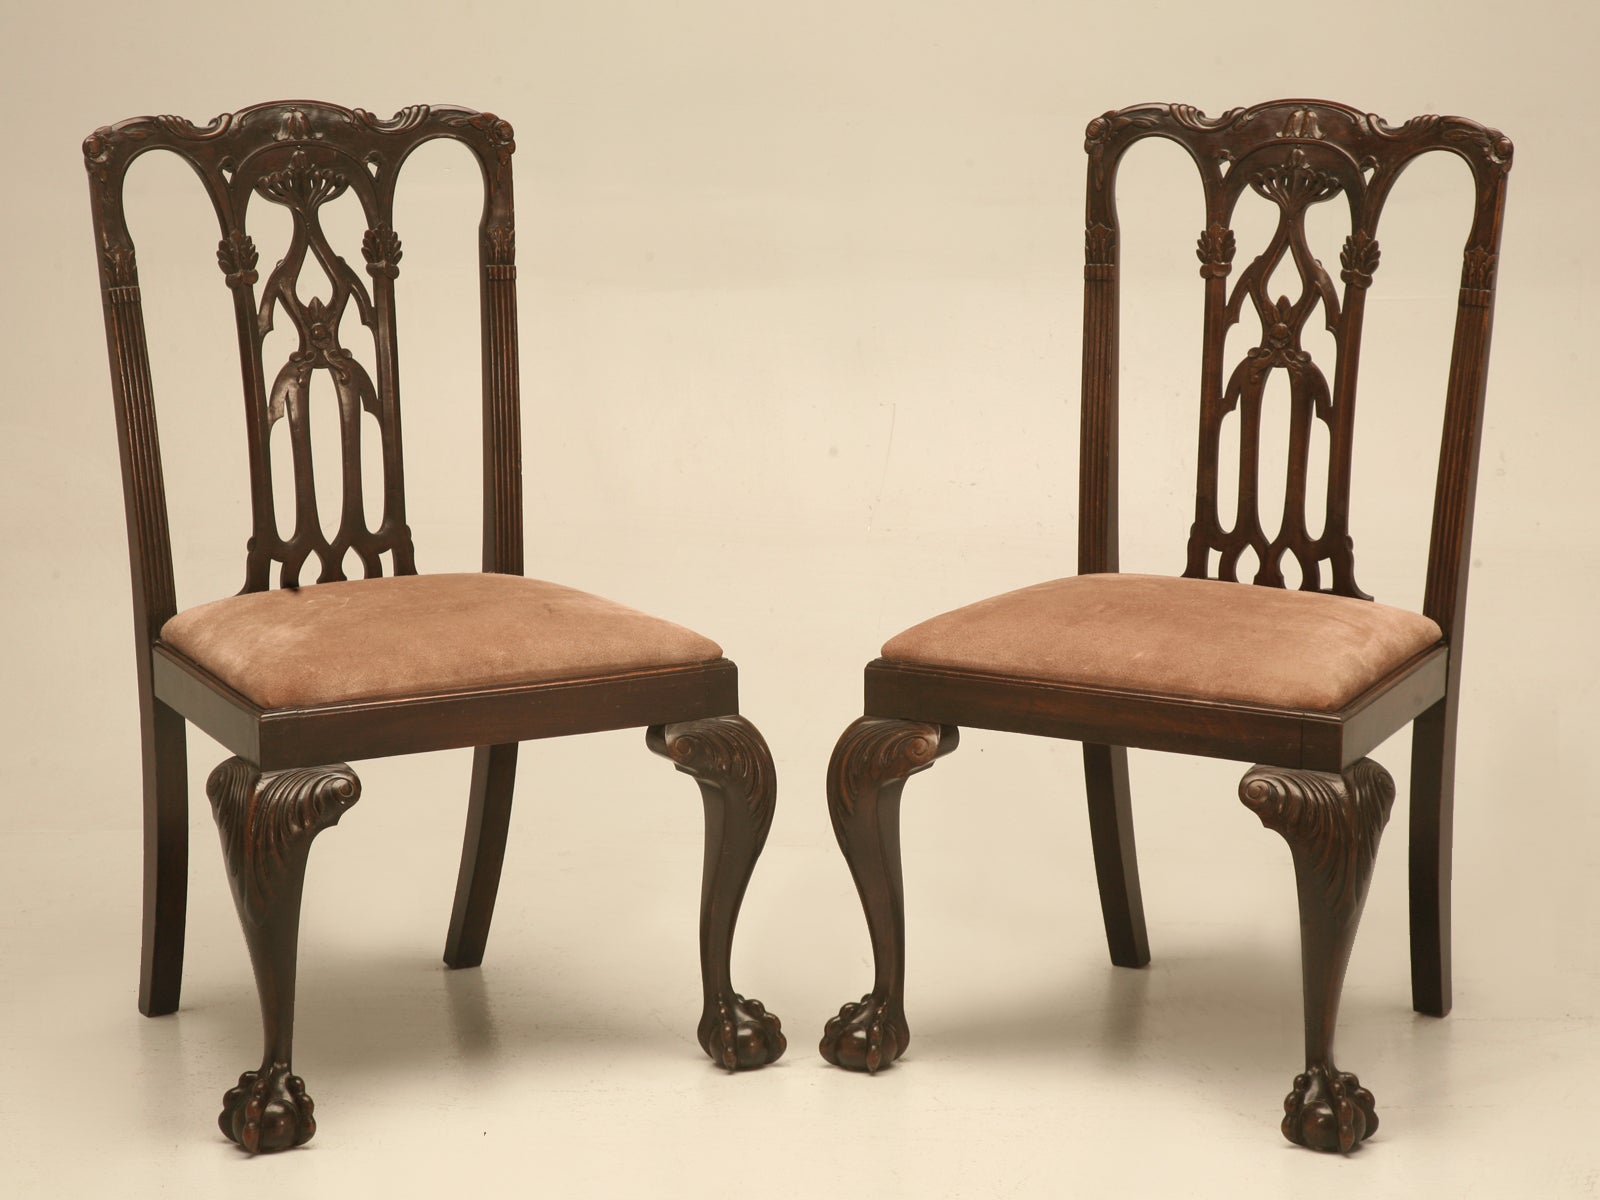 Incredible Pair of Antique Dutch Chippendale Side Chairs w/Exquisite Details